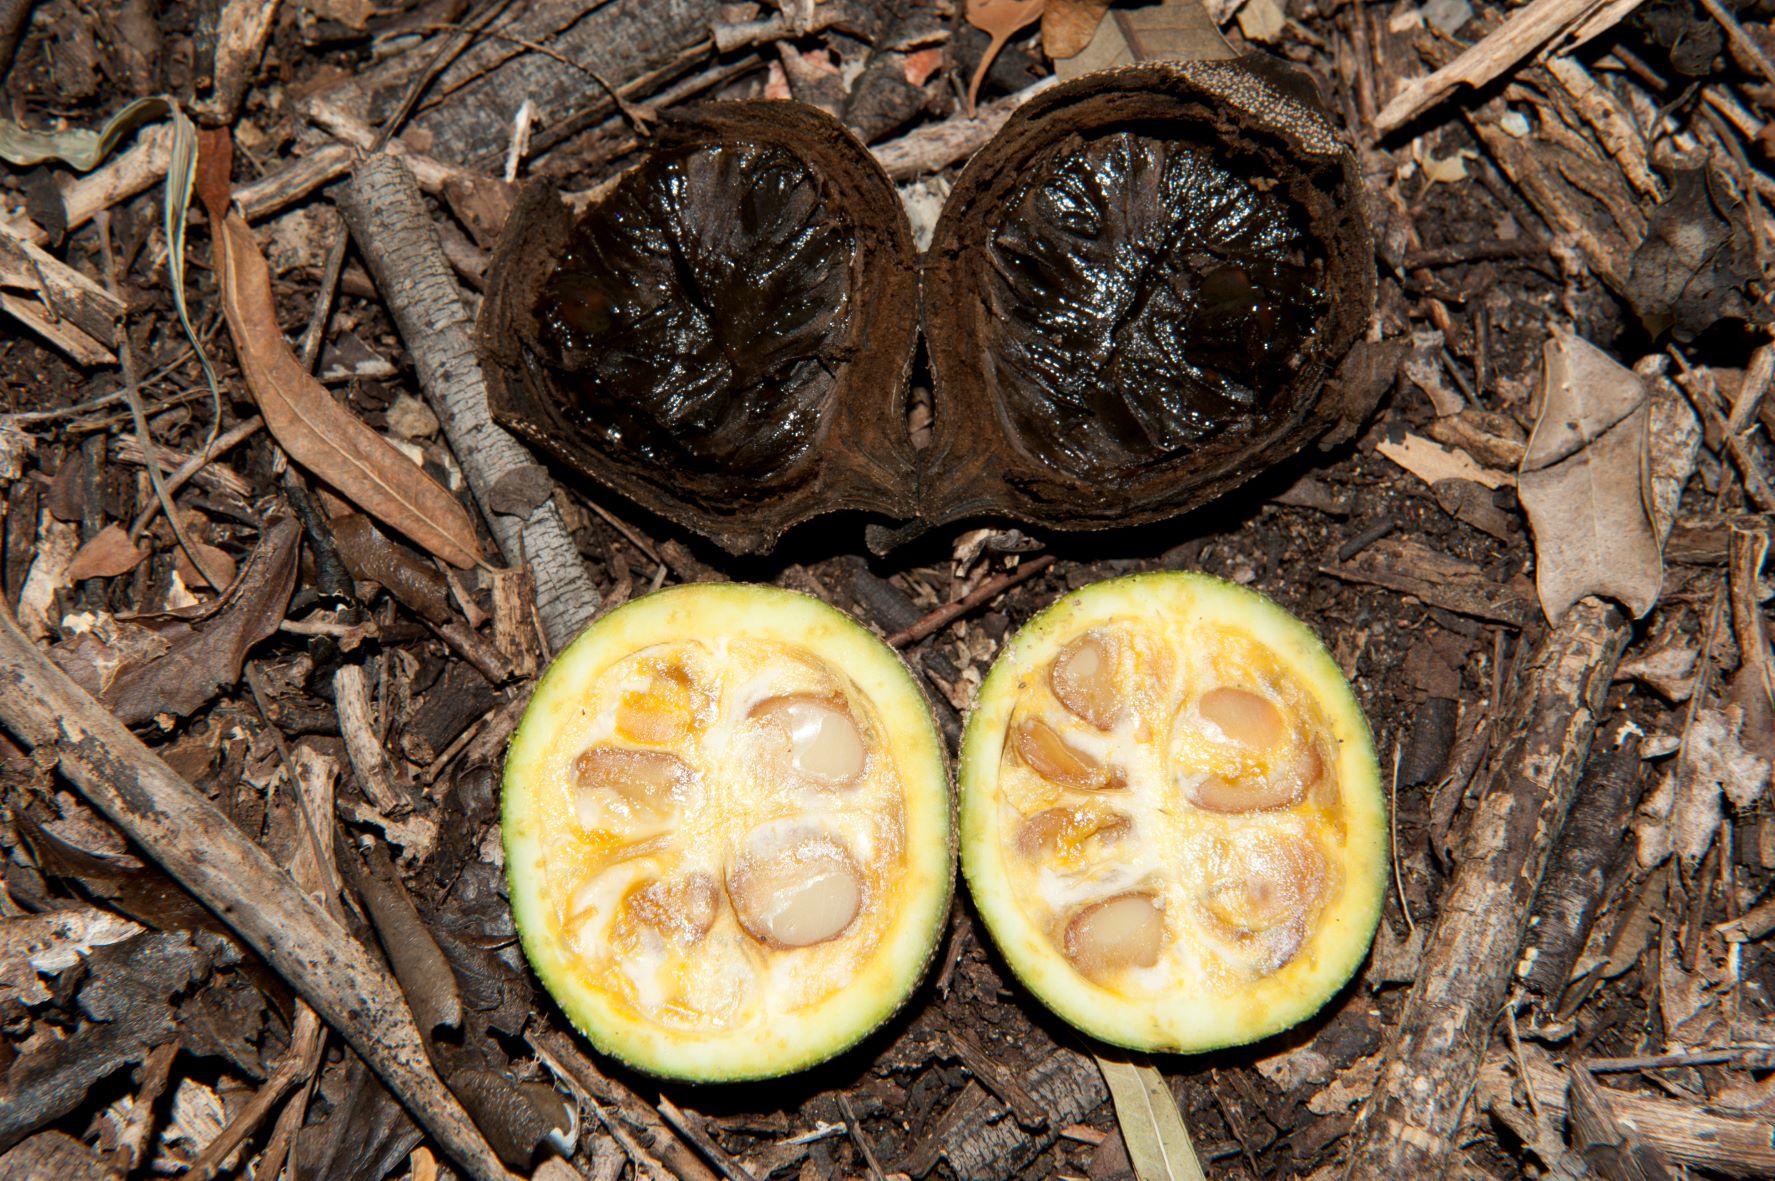 A fruit cut in half lying on the forest floor. The two of the seeds look healthy, the other two look like they are potentially inviable.